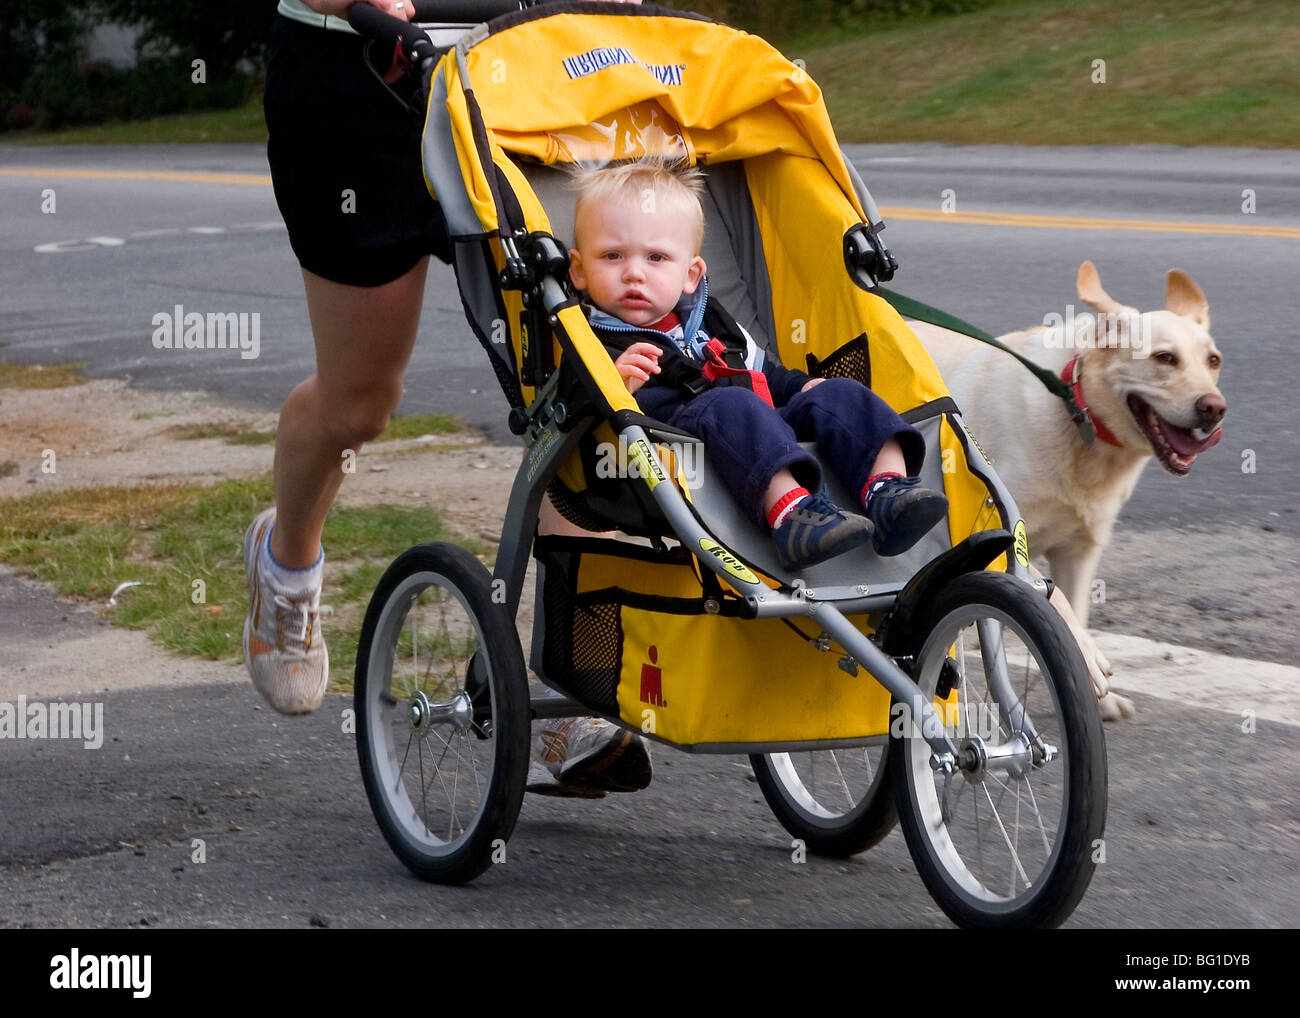 dog and baby stroller